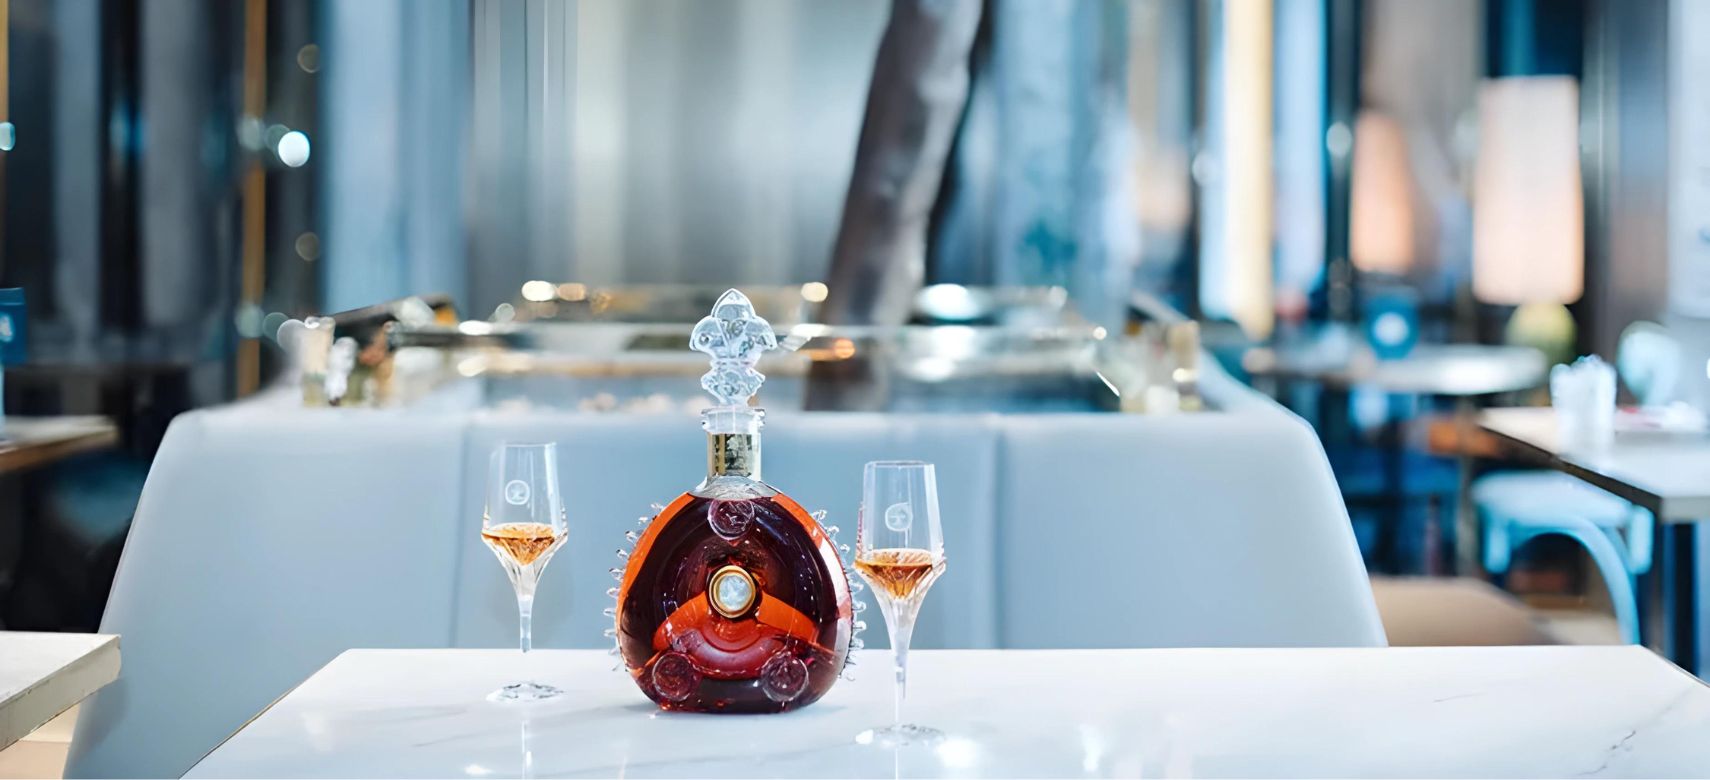 Photo for: The Legacy of Louis XIII Cognac